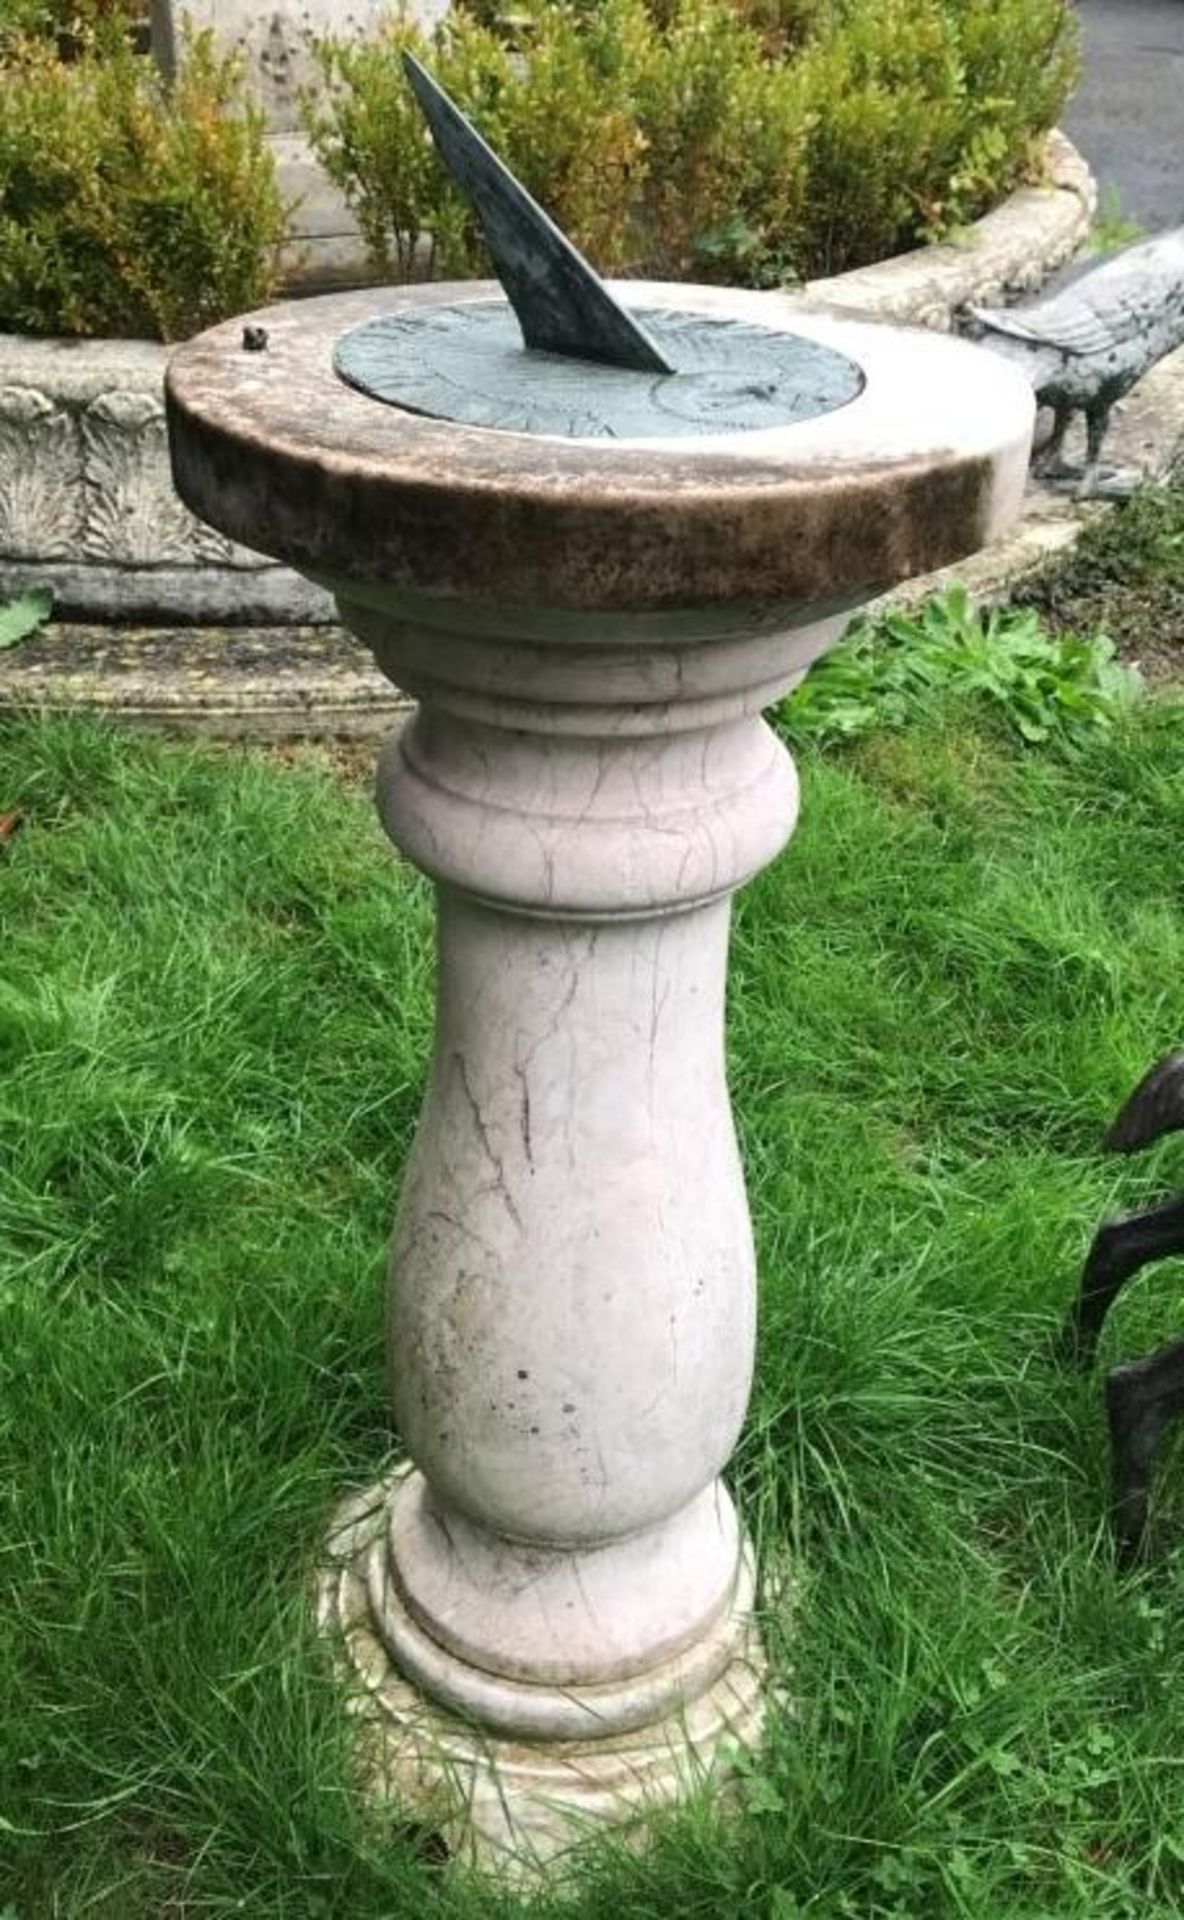 1 x Solstice Stone Sundial Shaped Pedestal With Dial Plate - Measurements Height 84cm x Diameter - Image 5 of 8